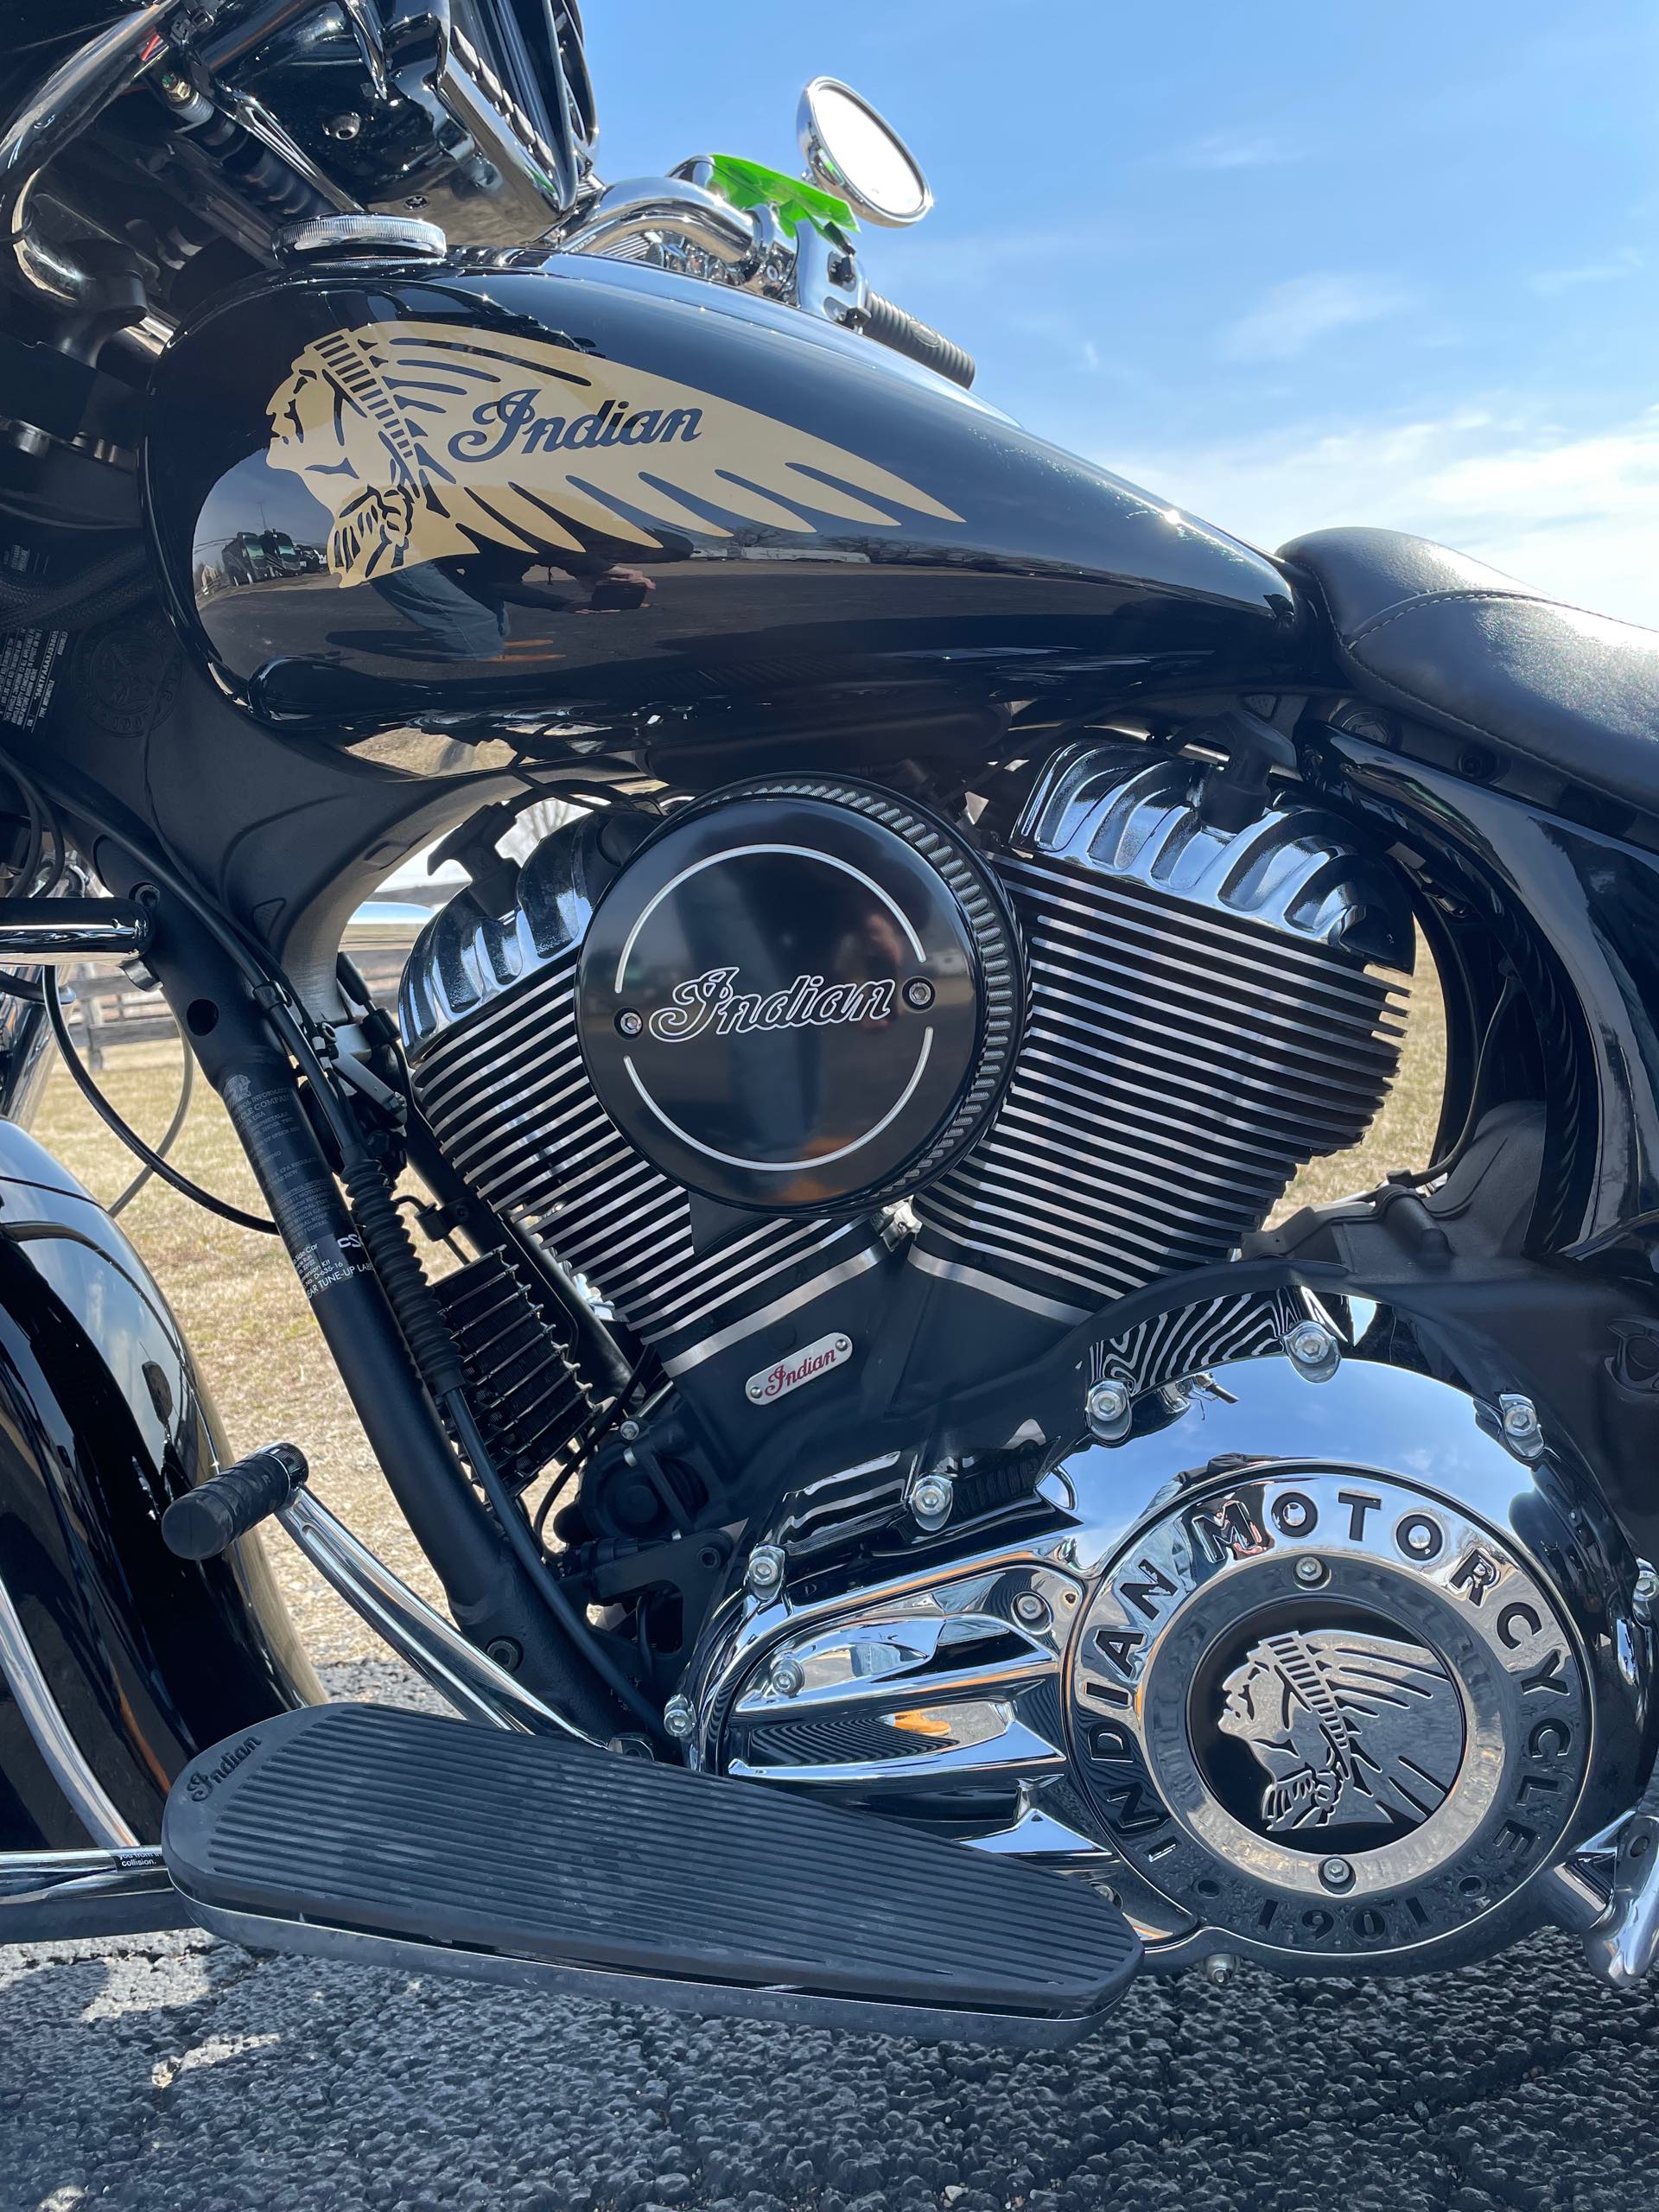 2018 Indian Chieftain Classic at Randy's Cycle